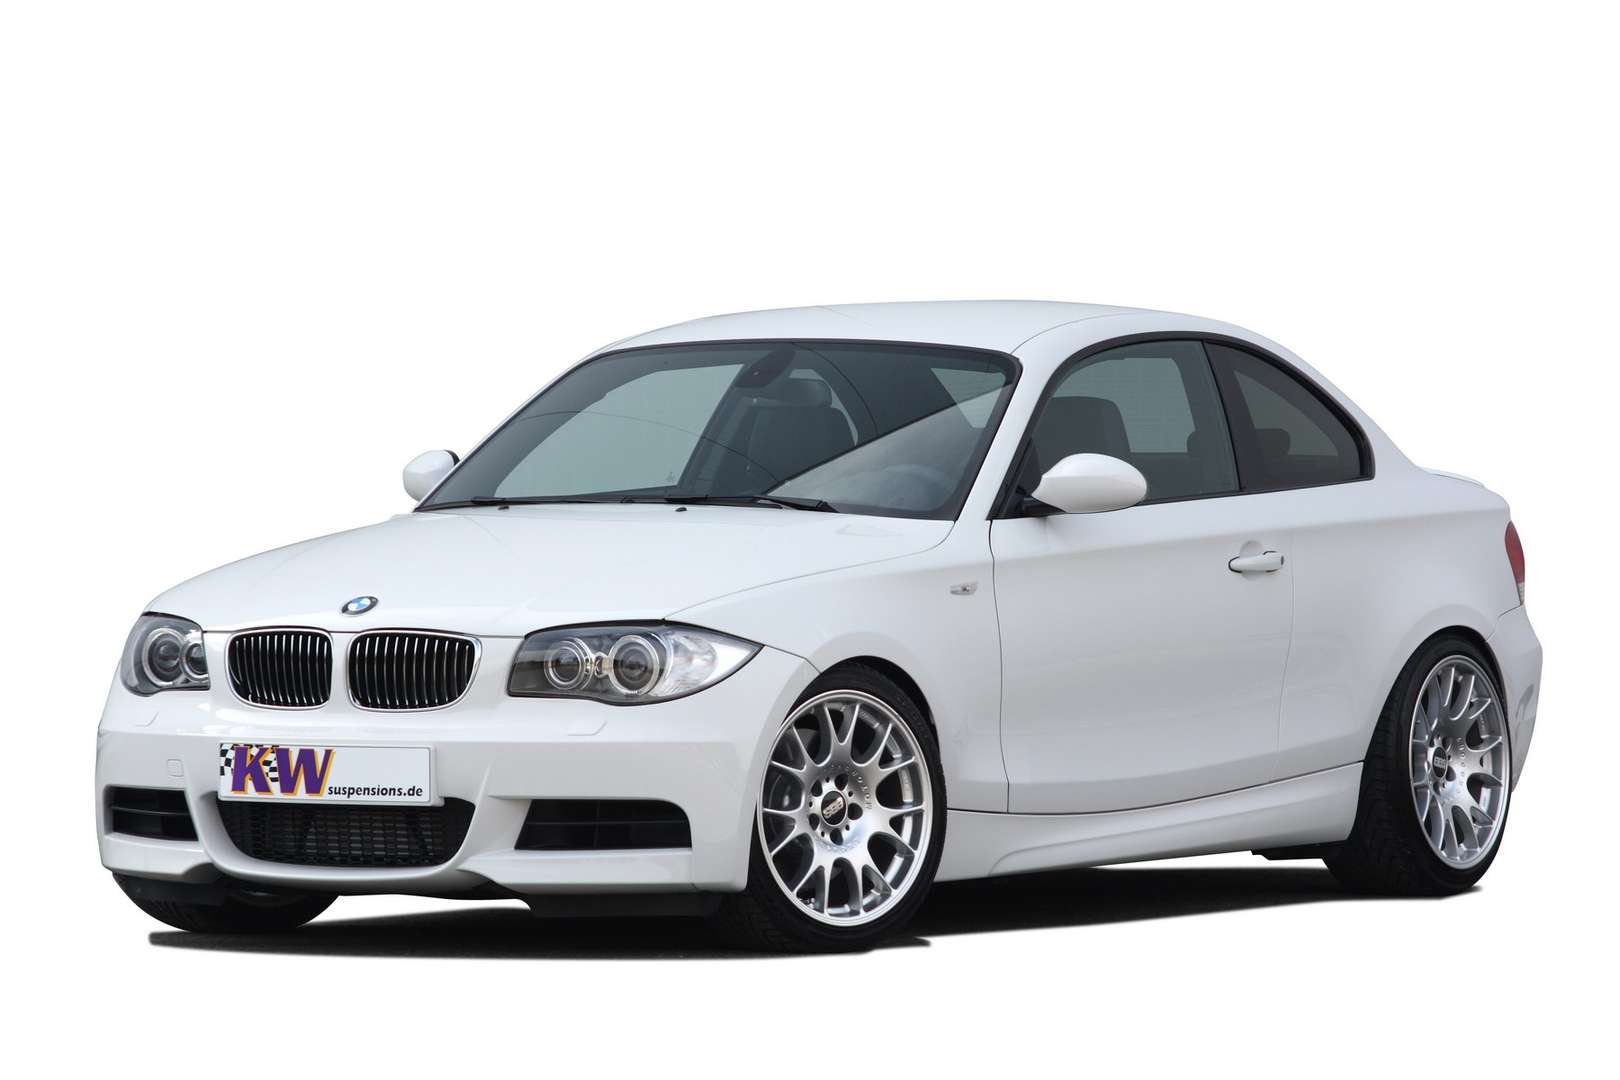 BMW 1 Series Coupe #7930207